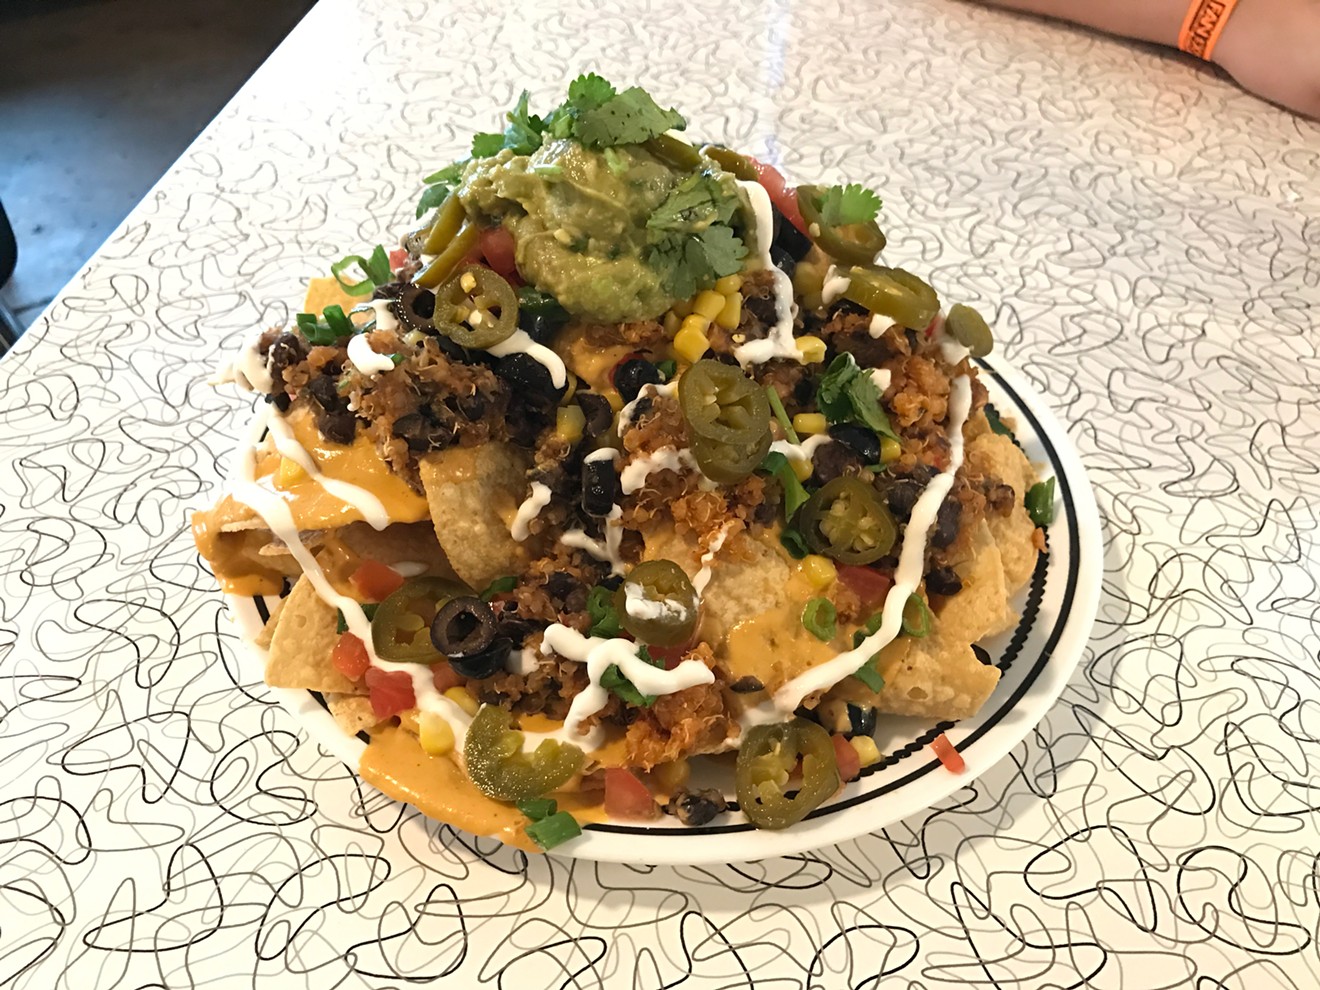 The nachos are the most popular dish "by far" since debuting as a blue plate special early in the 2000s.